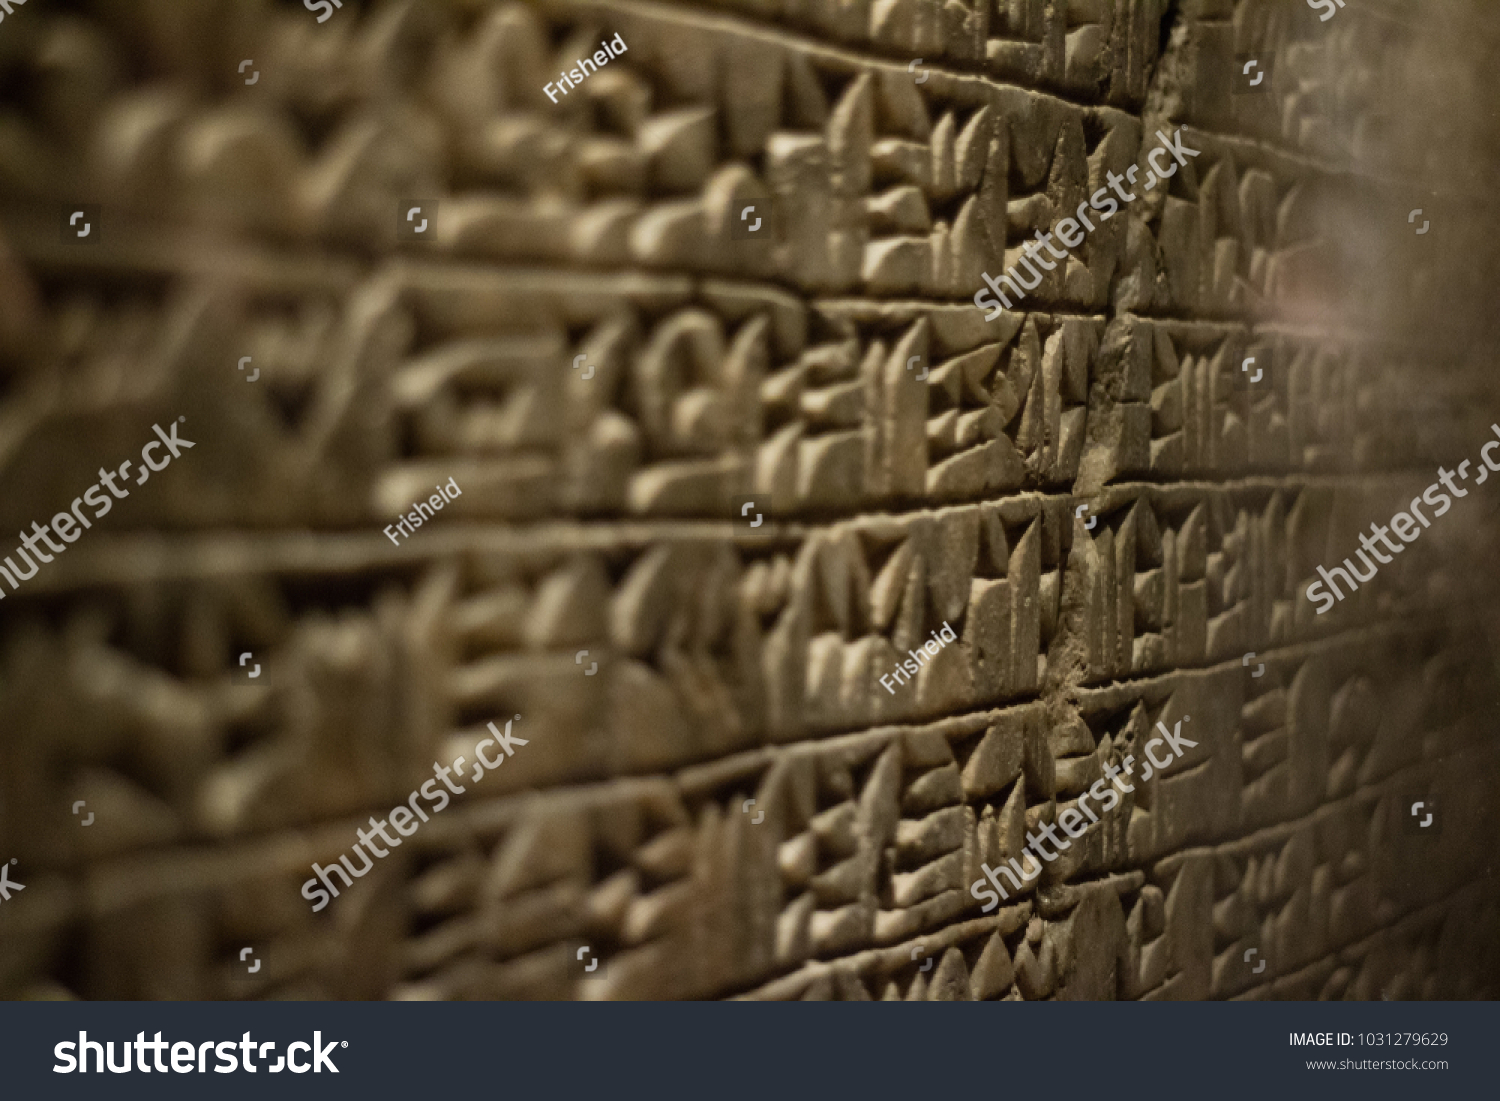 A stone tablet inscribed with Cuneiform script #1031279629